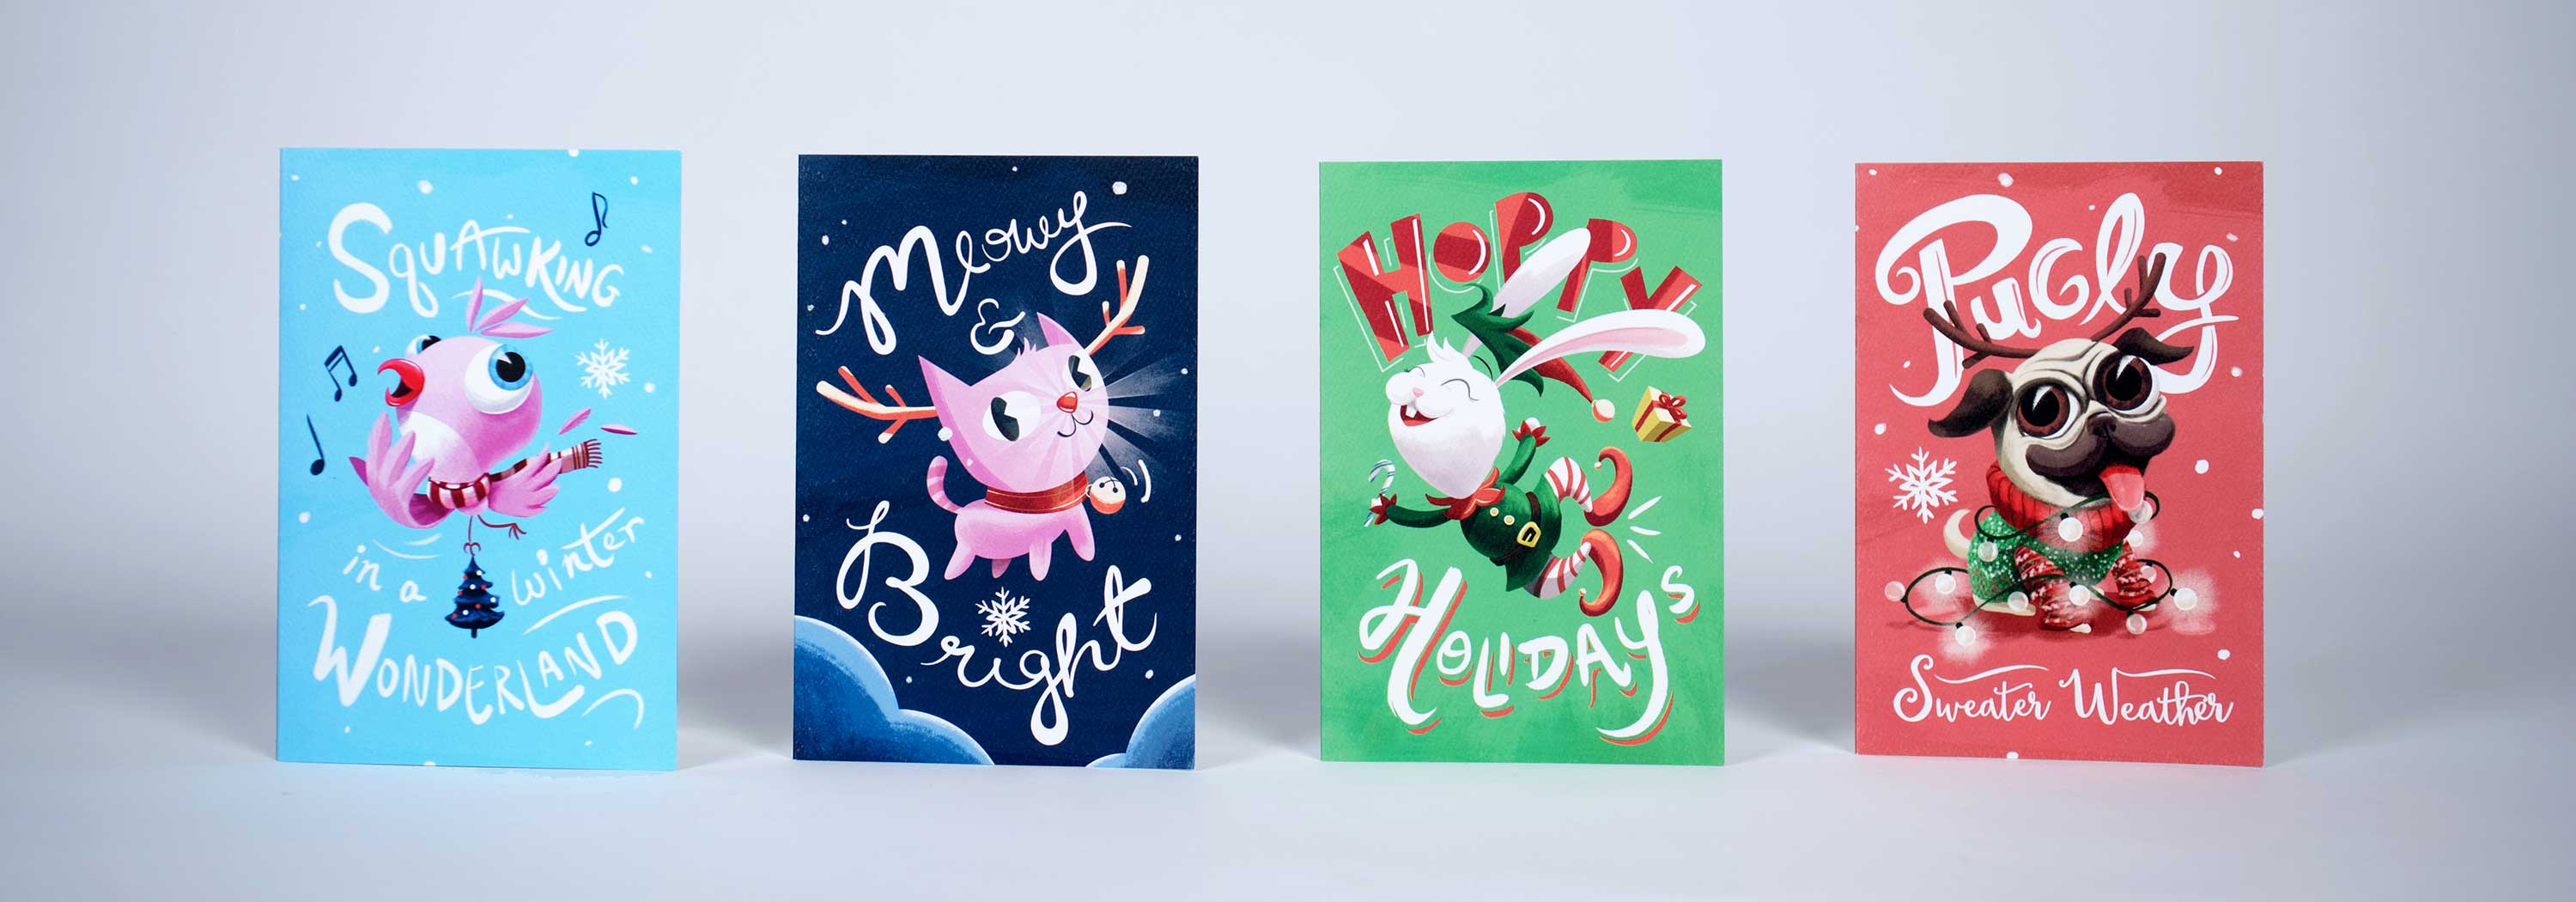 custom illustrated holiday cards with greetings and illustrated bird, cat, rabbit, dog